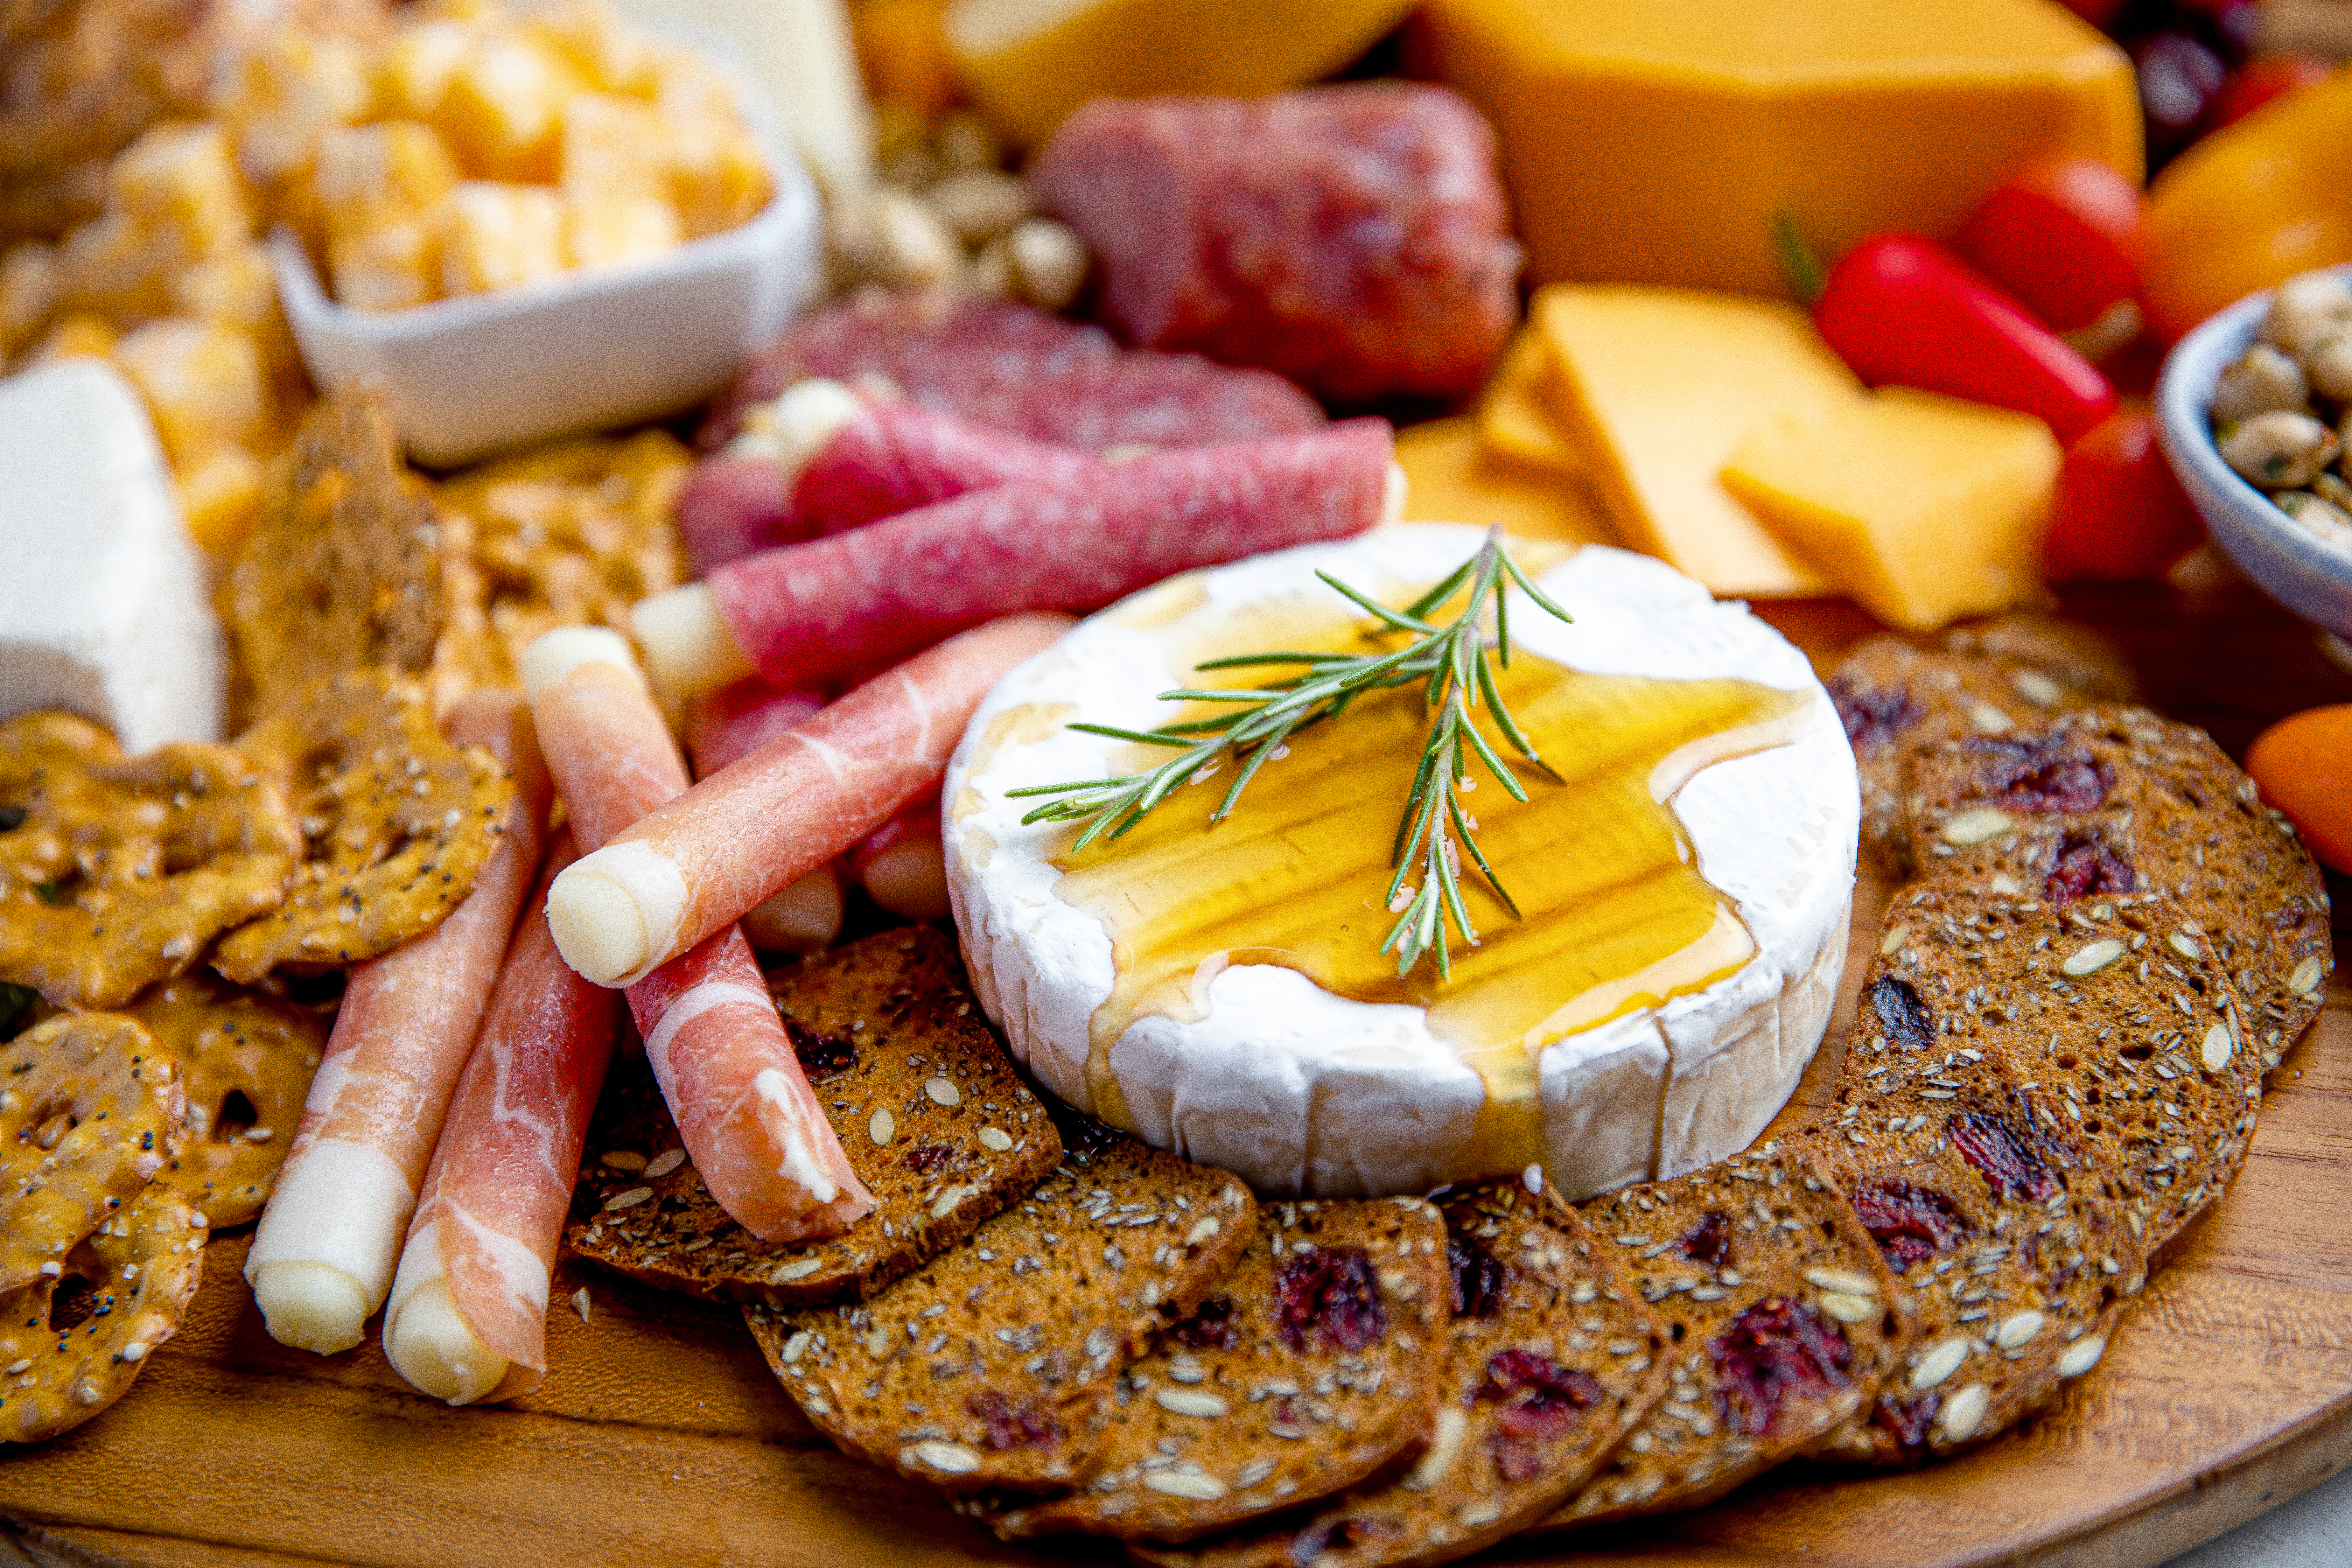 A board with sliced and rolled meats and a round of cheese with honey.